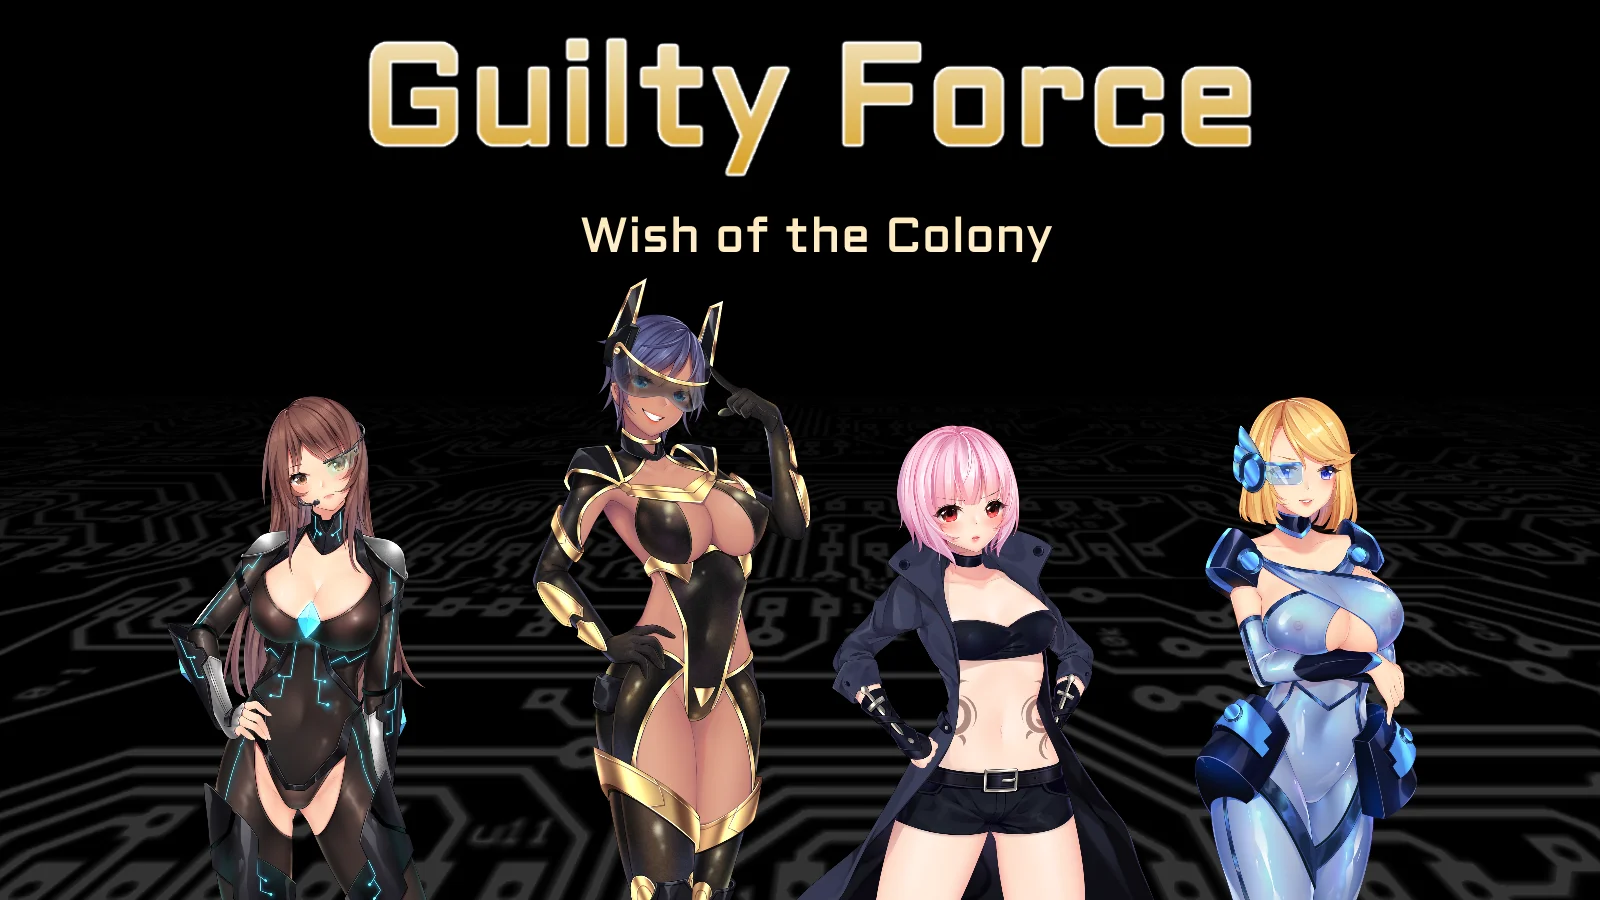 Guilty Force: Wish of the Colony